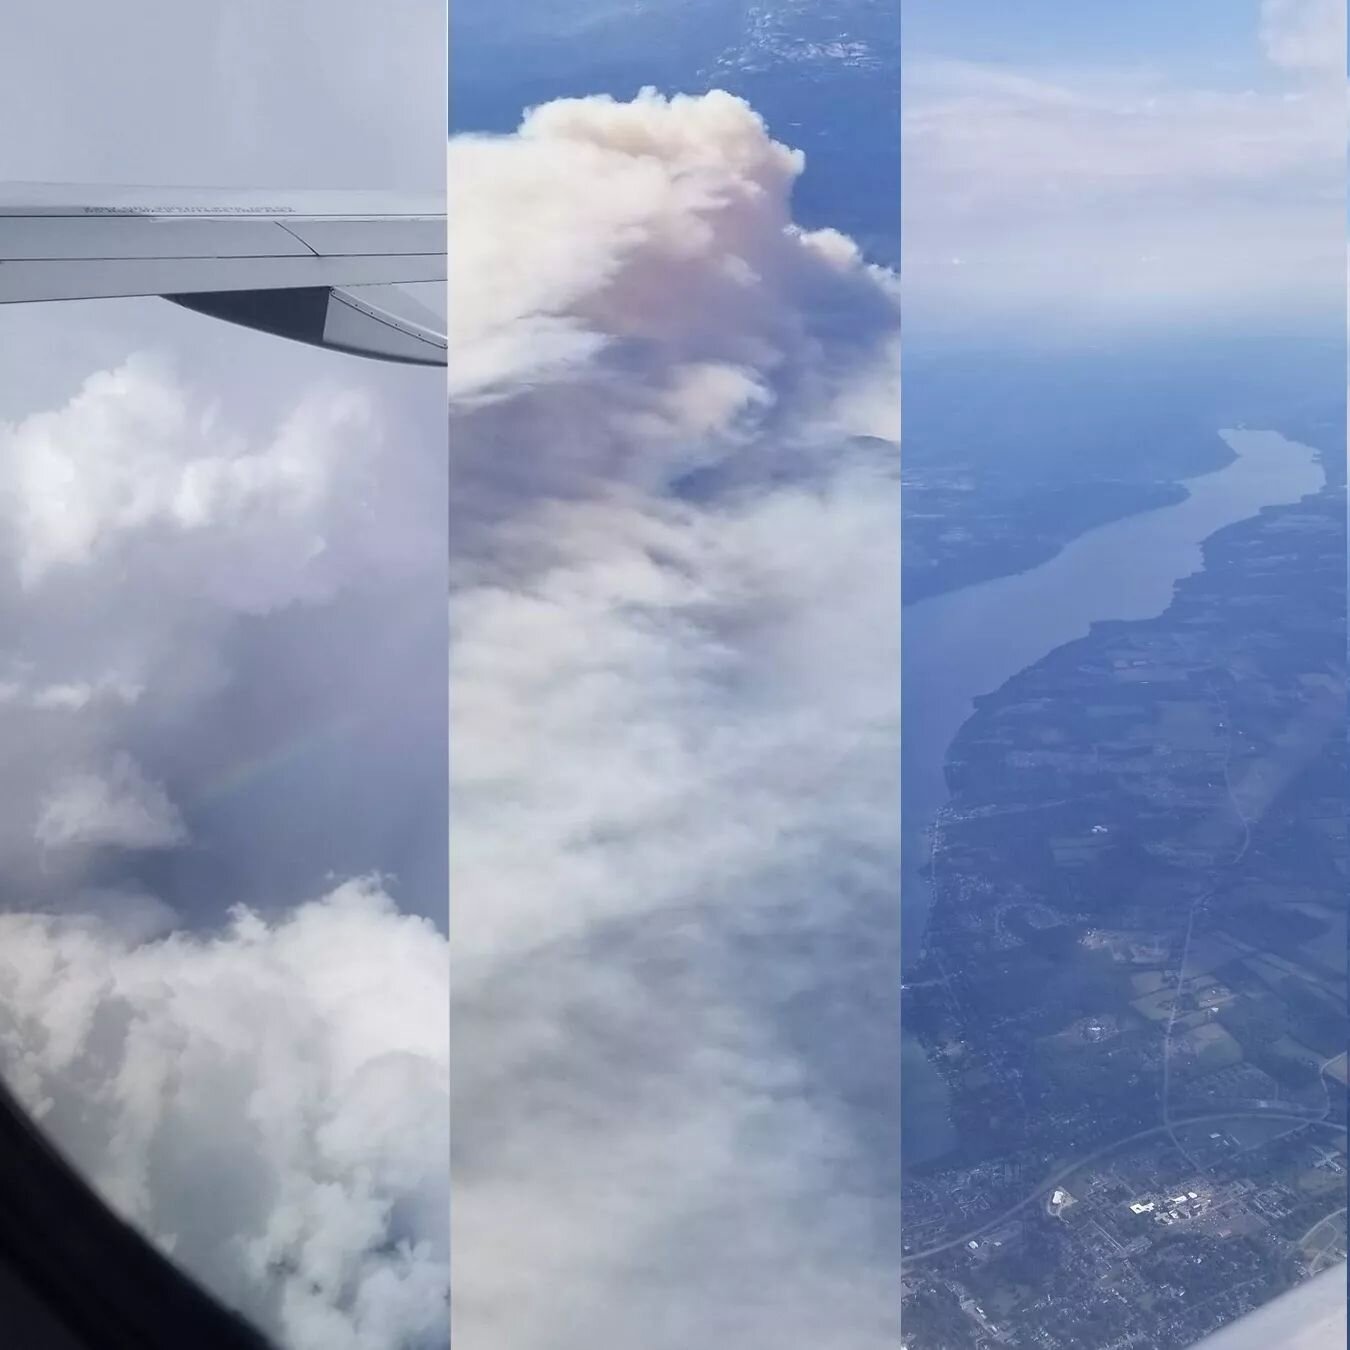 A montage of thoughts and images during my trip to New York.

1. Rainbow over Georgia, over 4,000 acres on fire in Electra California, billions of gallons of water in upstate NY. 

2. Clouds not giving a fuck

3. When you pay attention

4. Exploring 